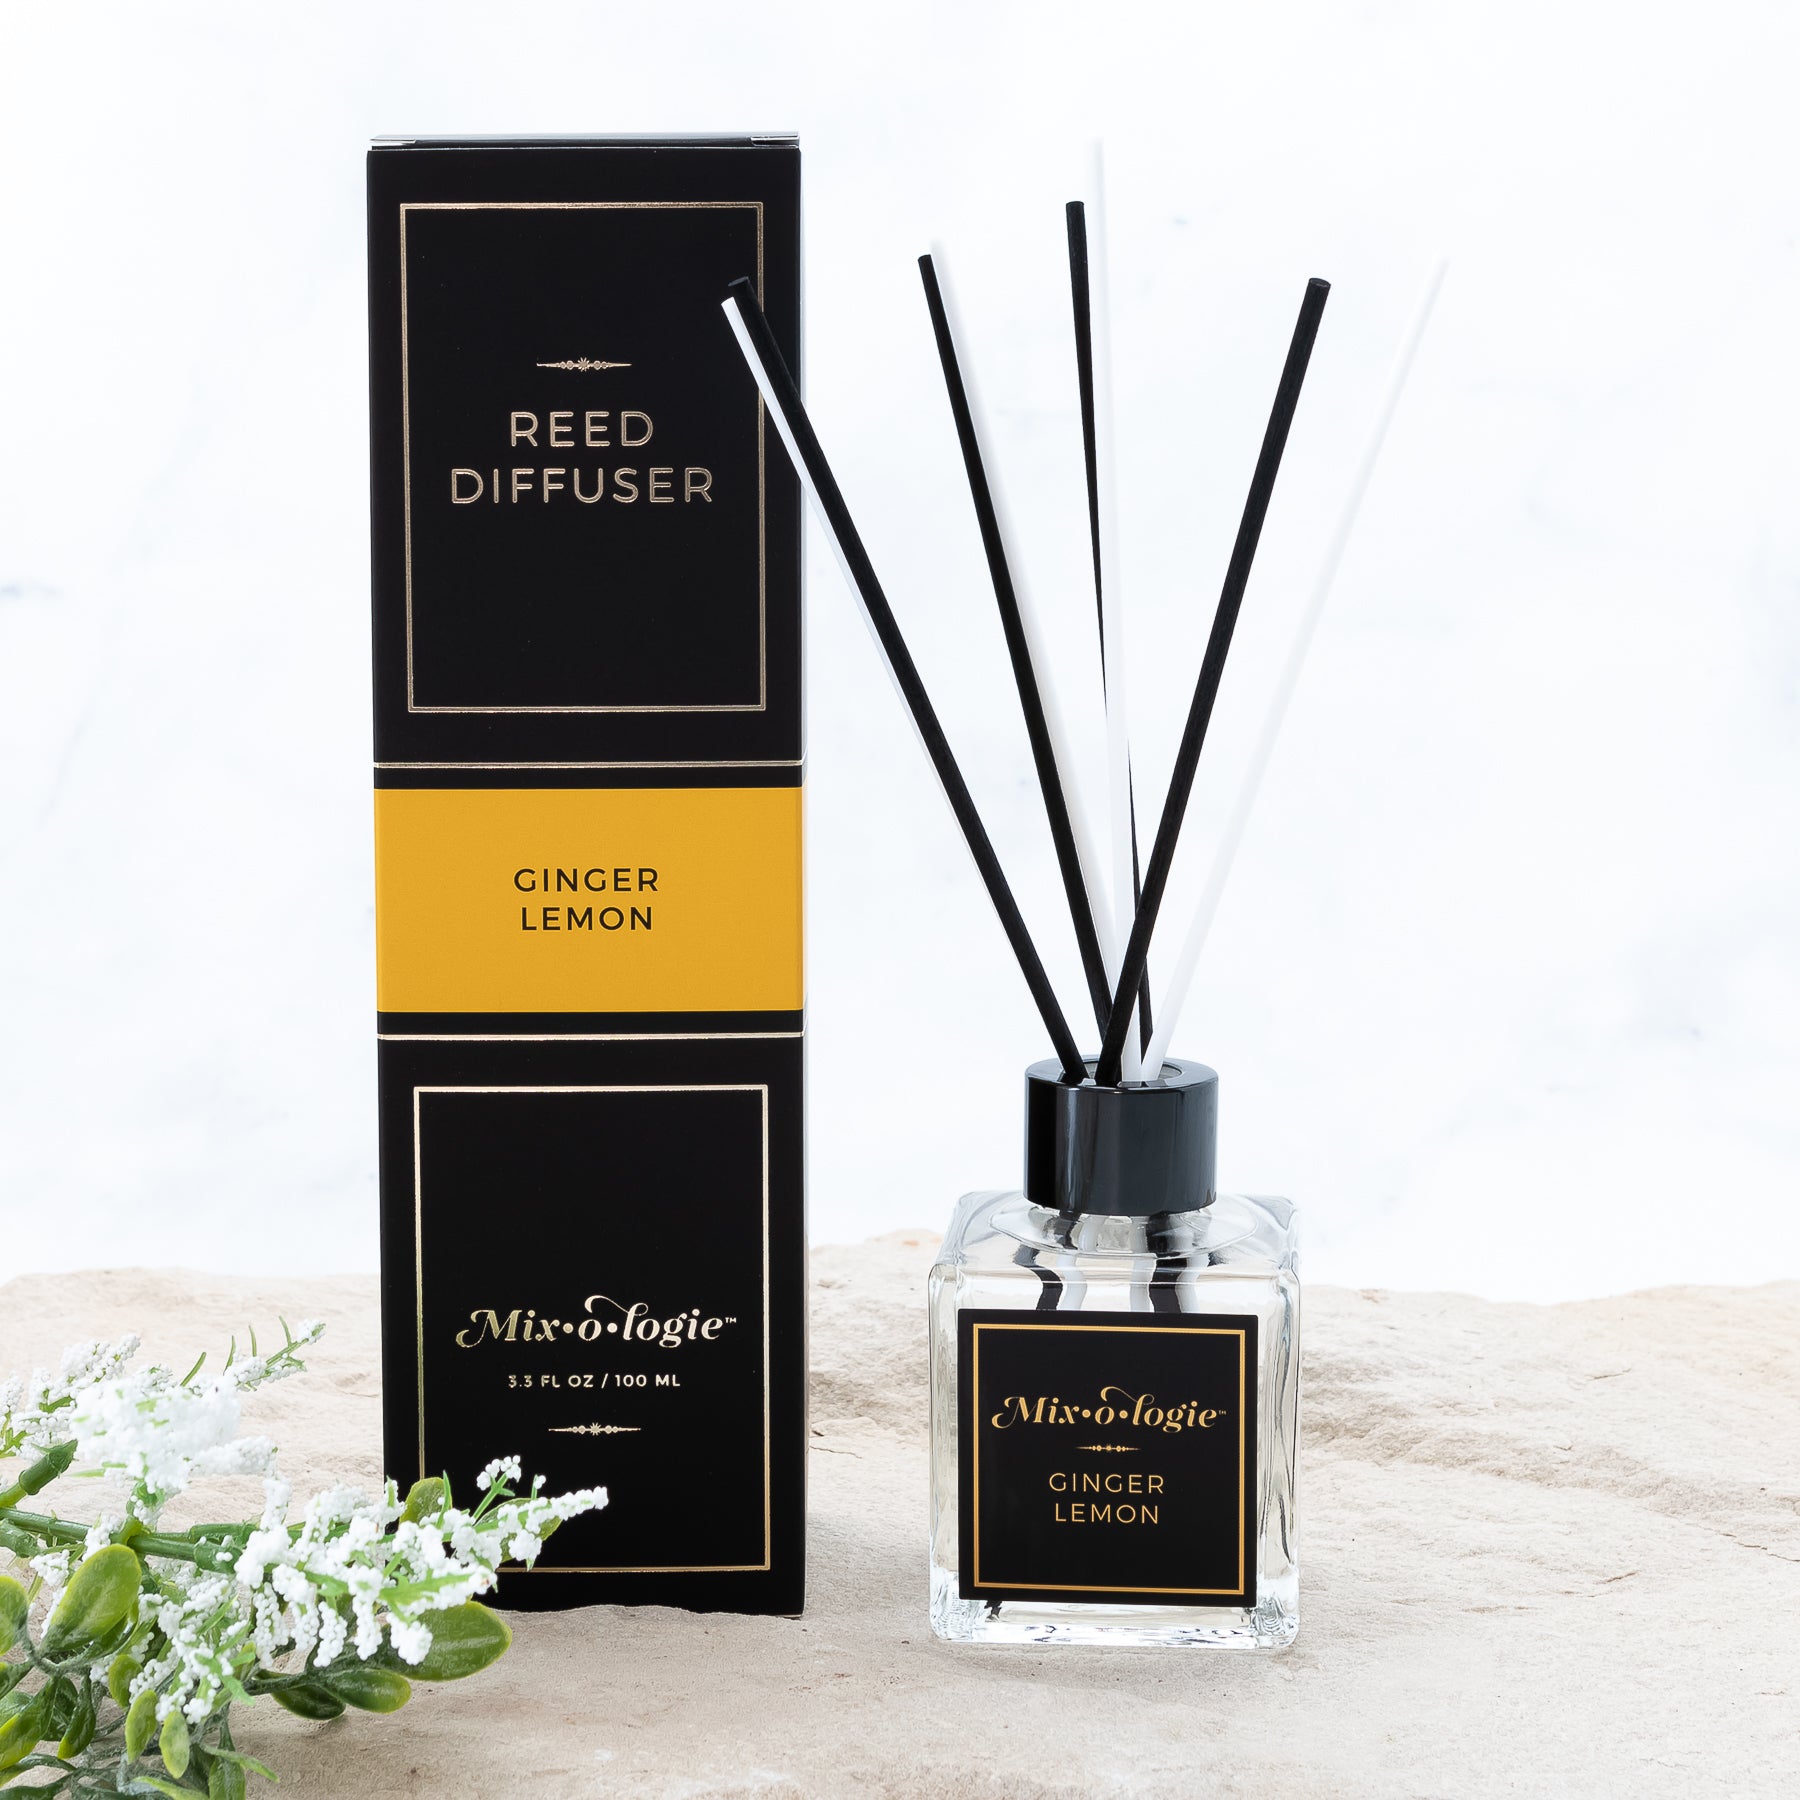 Ginger Lemon Reed Diffuser is a clear square glass container with black label that says Mixologie – Ginger Lemon. Has a black top and 4 white & 4 black reed sticks coming out of top, is 3.3 fl oz or 100 mL of clear scented liquid. Black rectangle package box with mustard label. Box and diffuser are pictured with sand and greenery with white flowers.